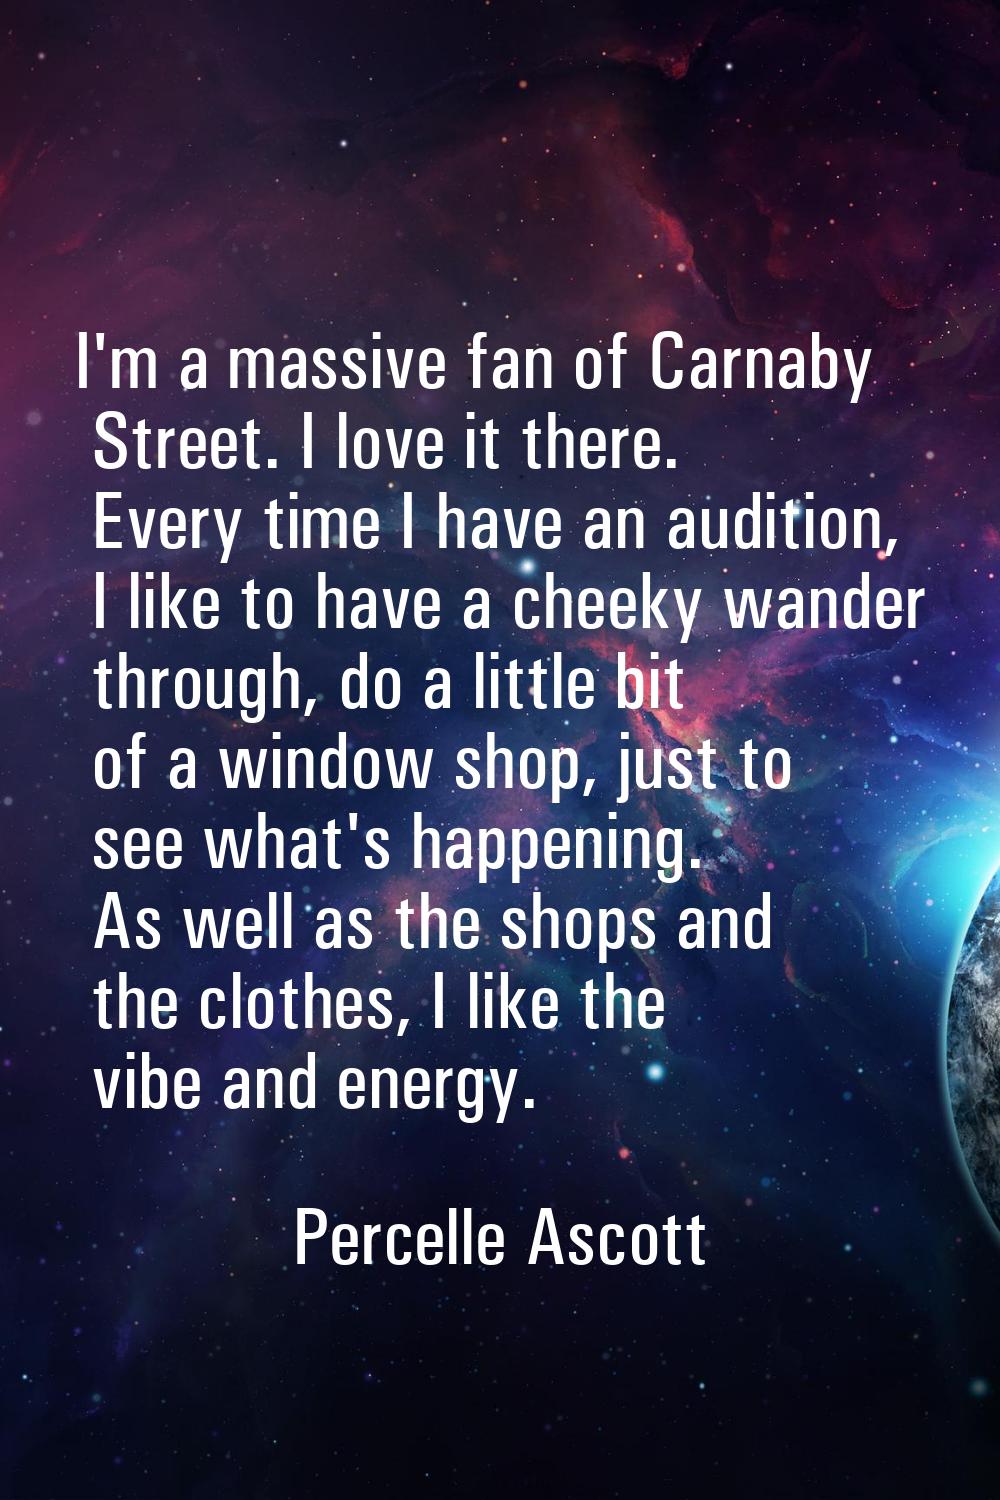 I'm a massive fan of Carnaby Street. I love it there. Every time I have an audition, I like to have